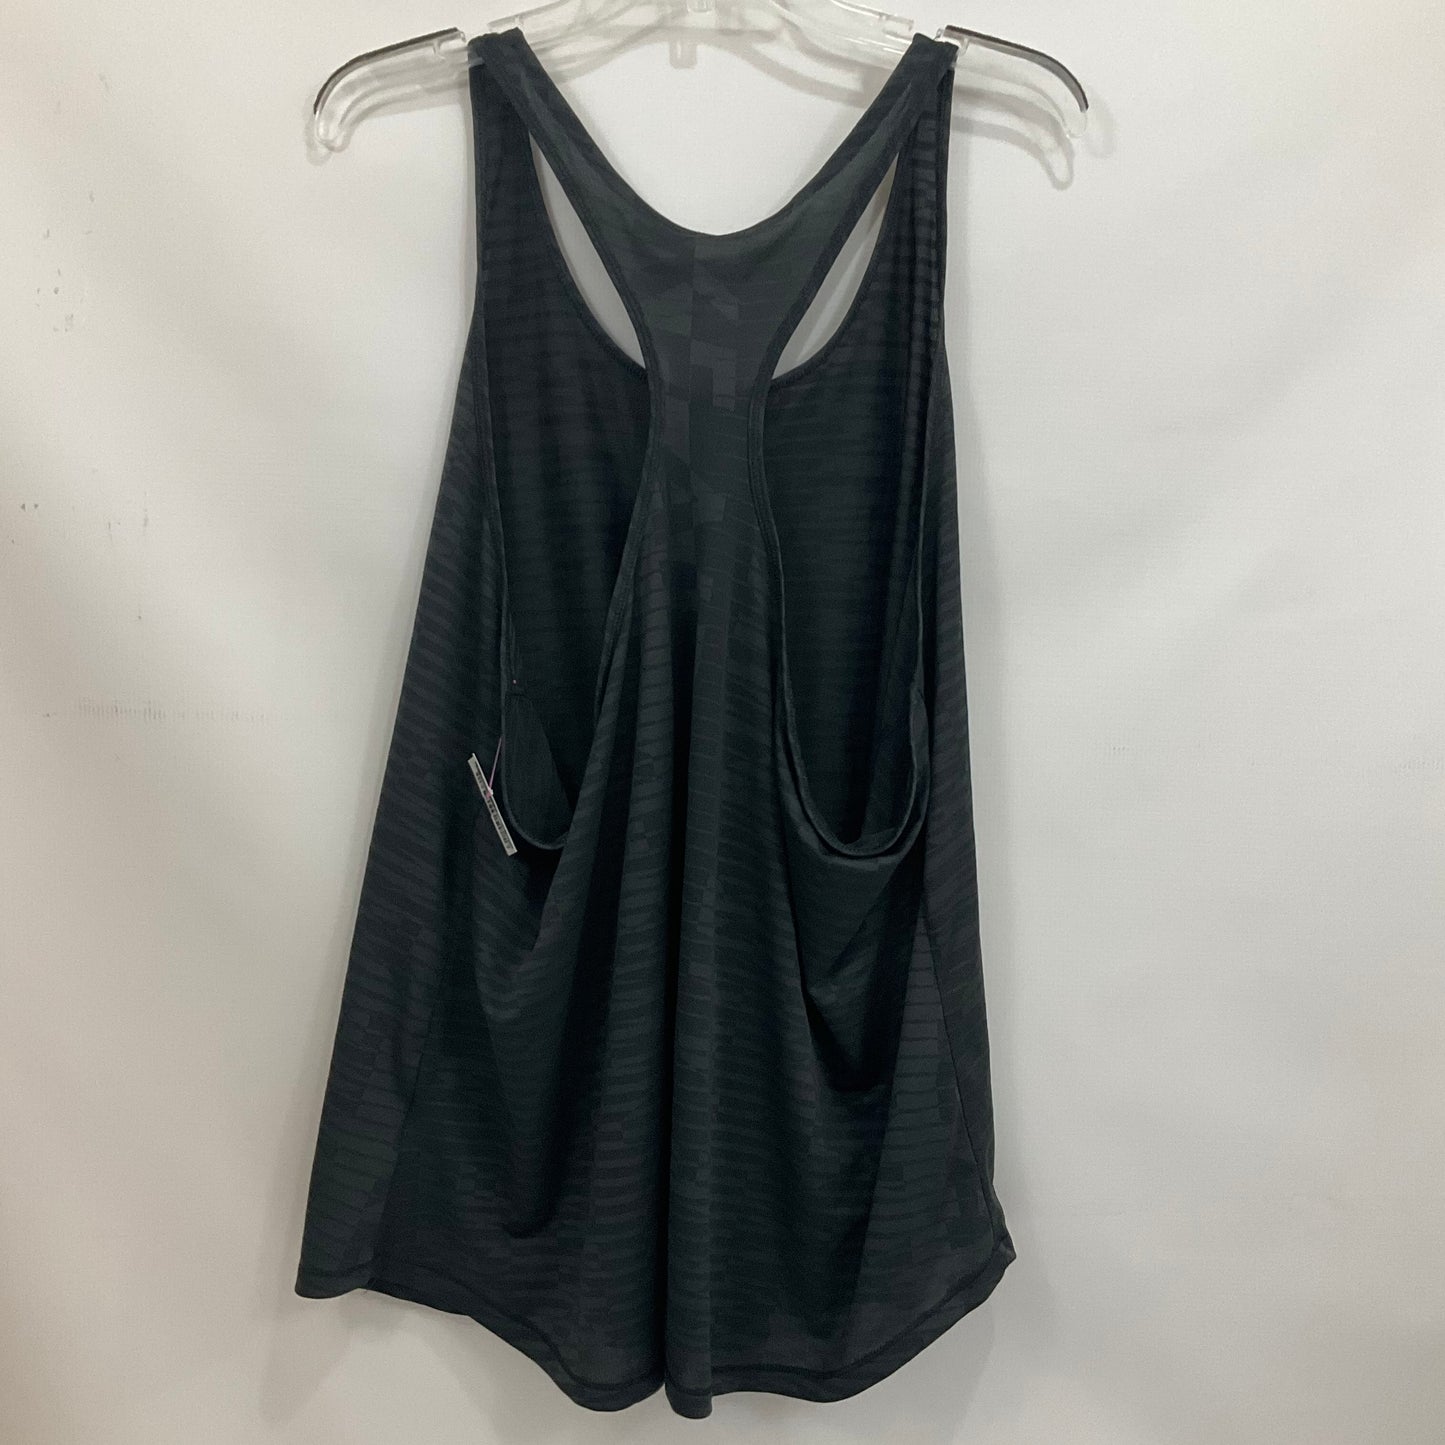 Athletic Tank Top By Nike Apparel  Size: 3x